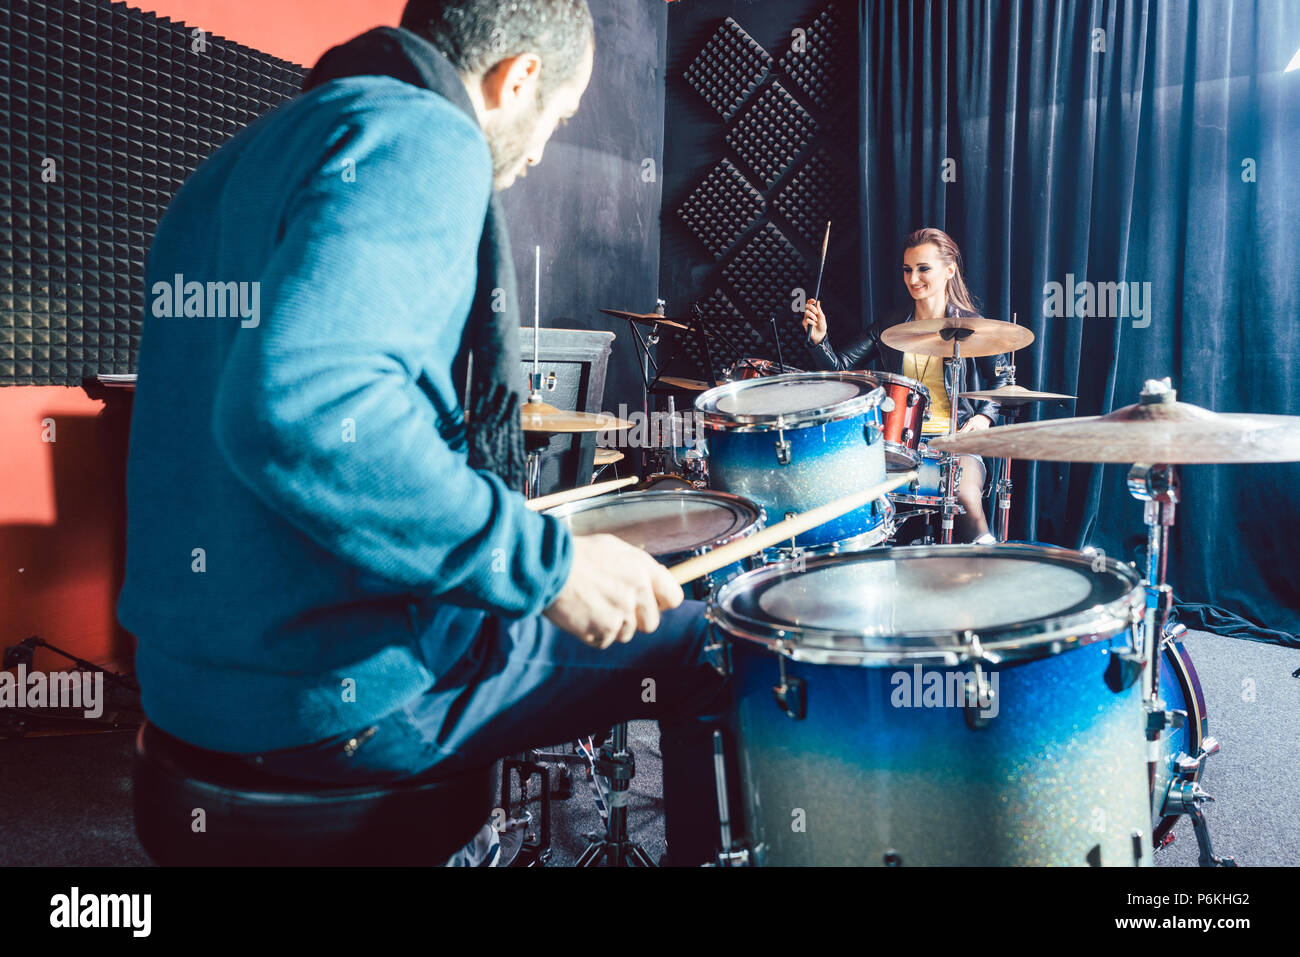 Woman receiving drum lessons from her music teacher Stock Photo